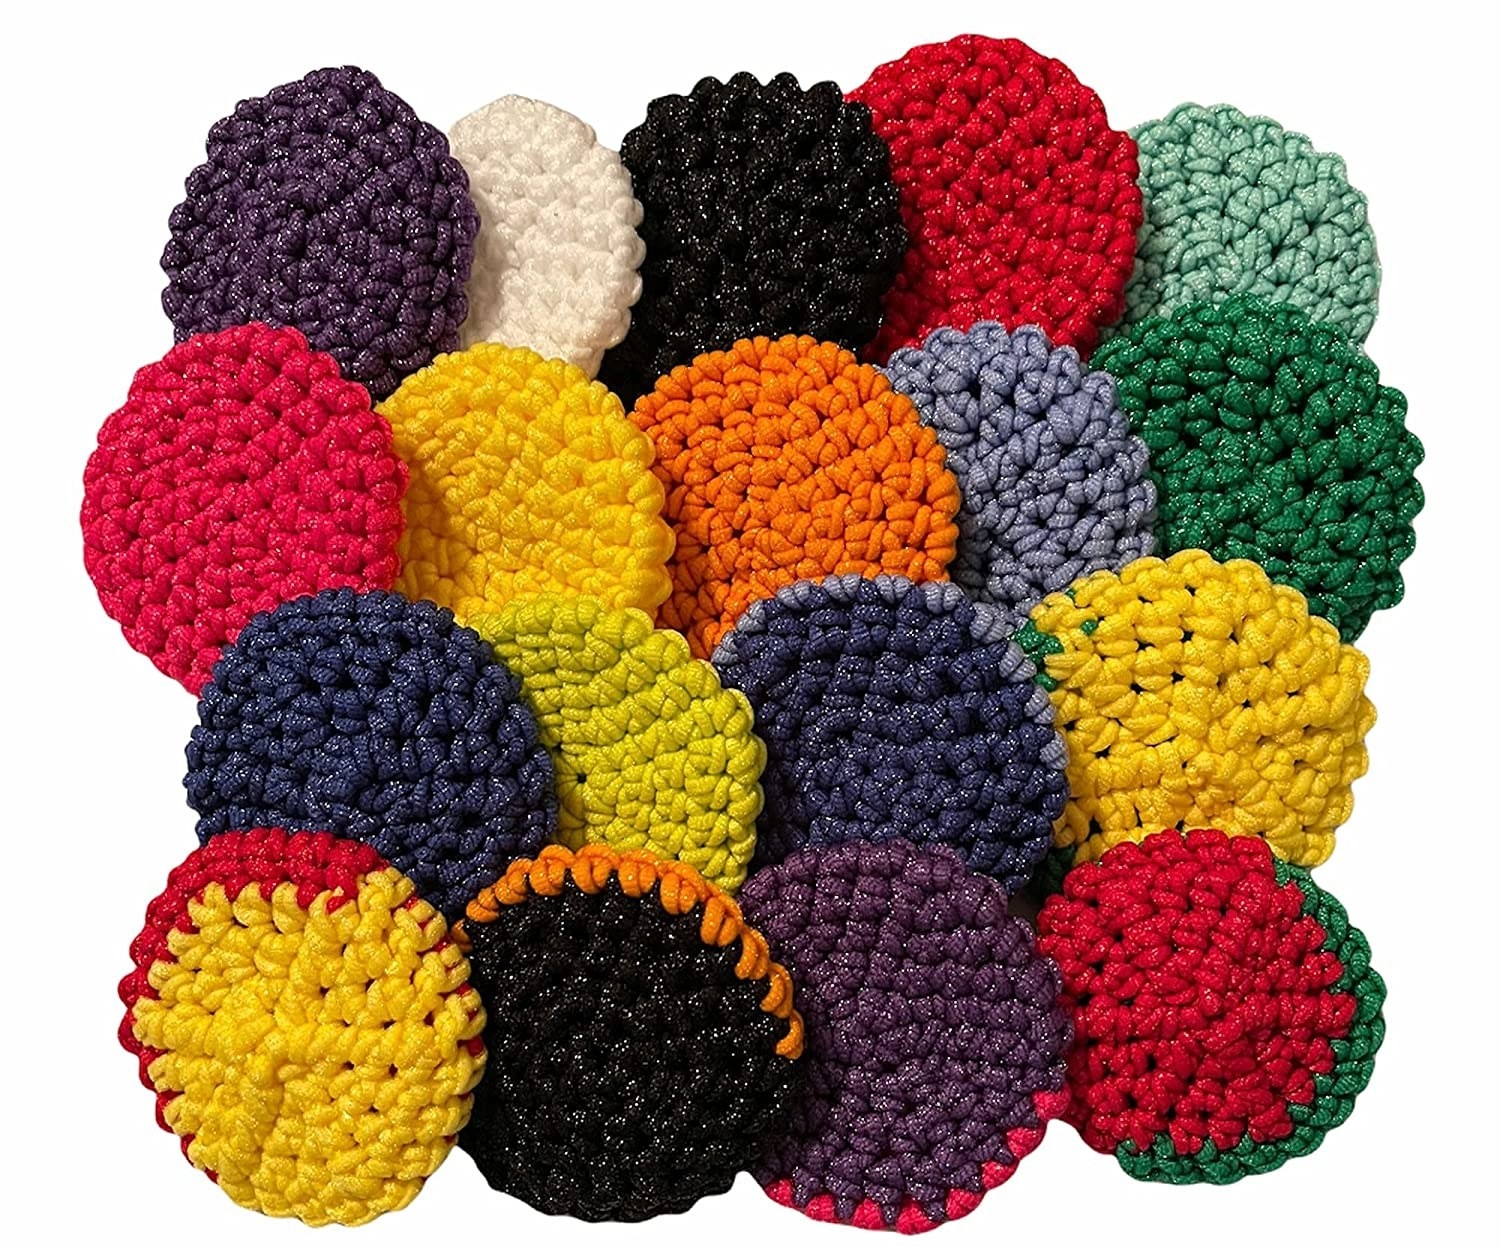 The nylon scrubbers in a variety of colors